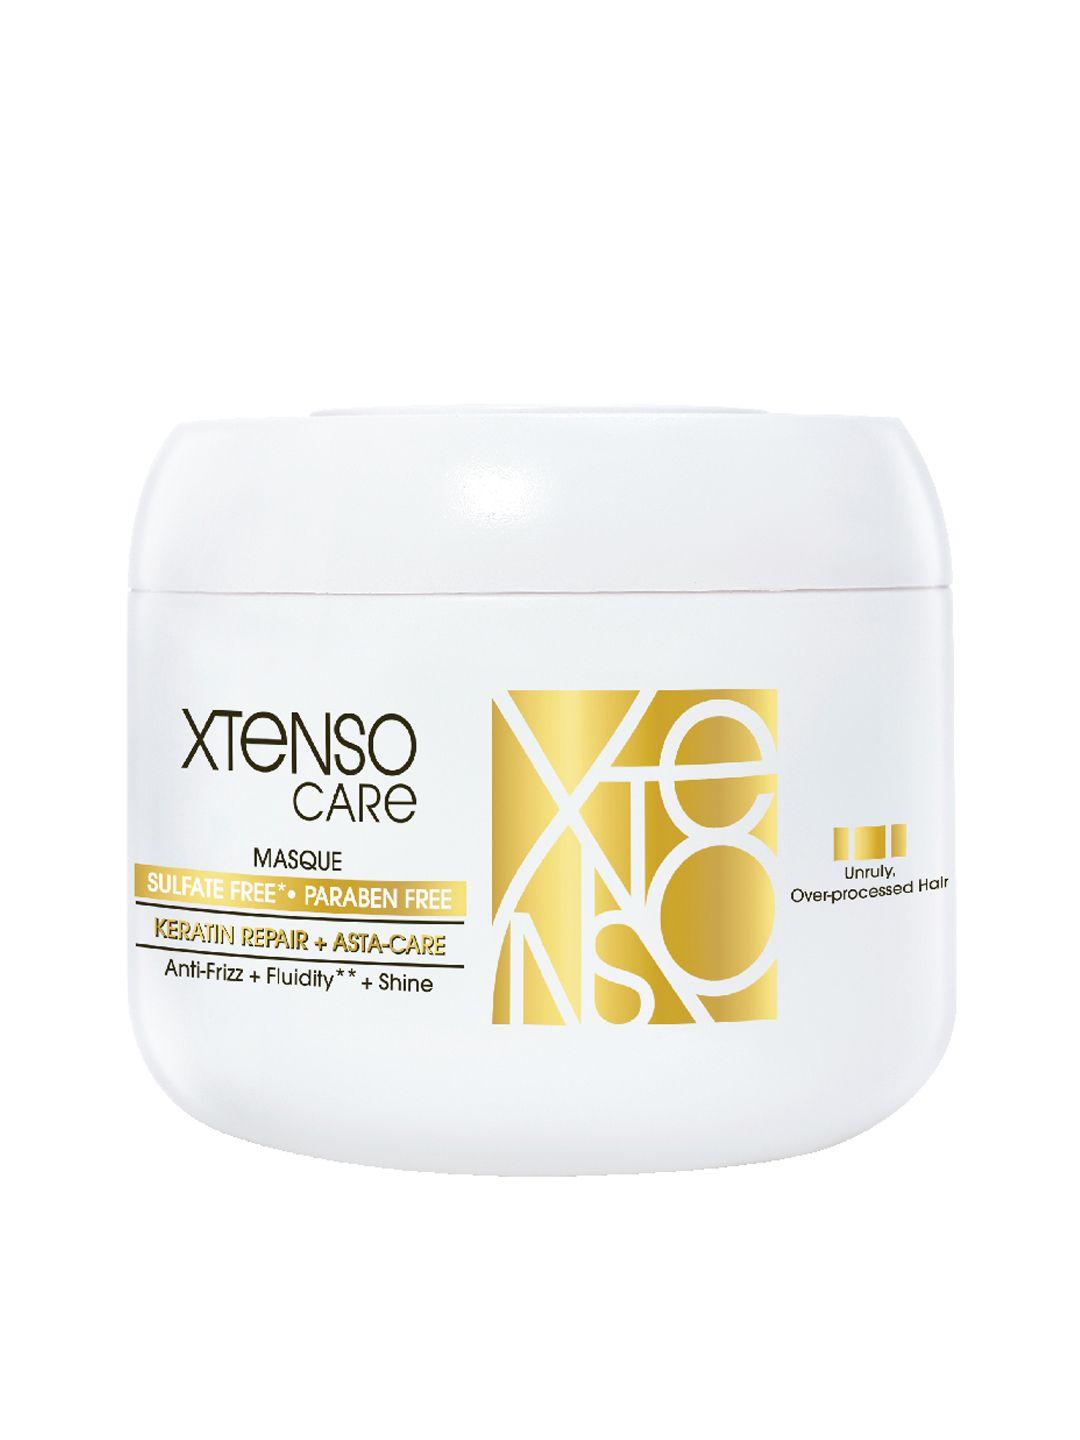 loreal professionnel xtenso care masque with keratin repair for straightened hair-196g